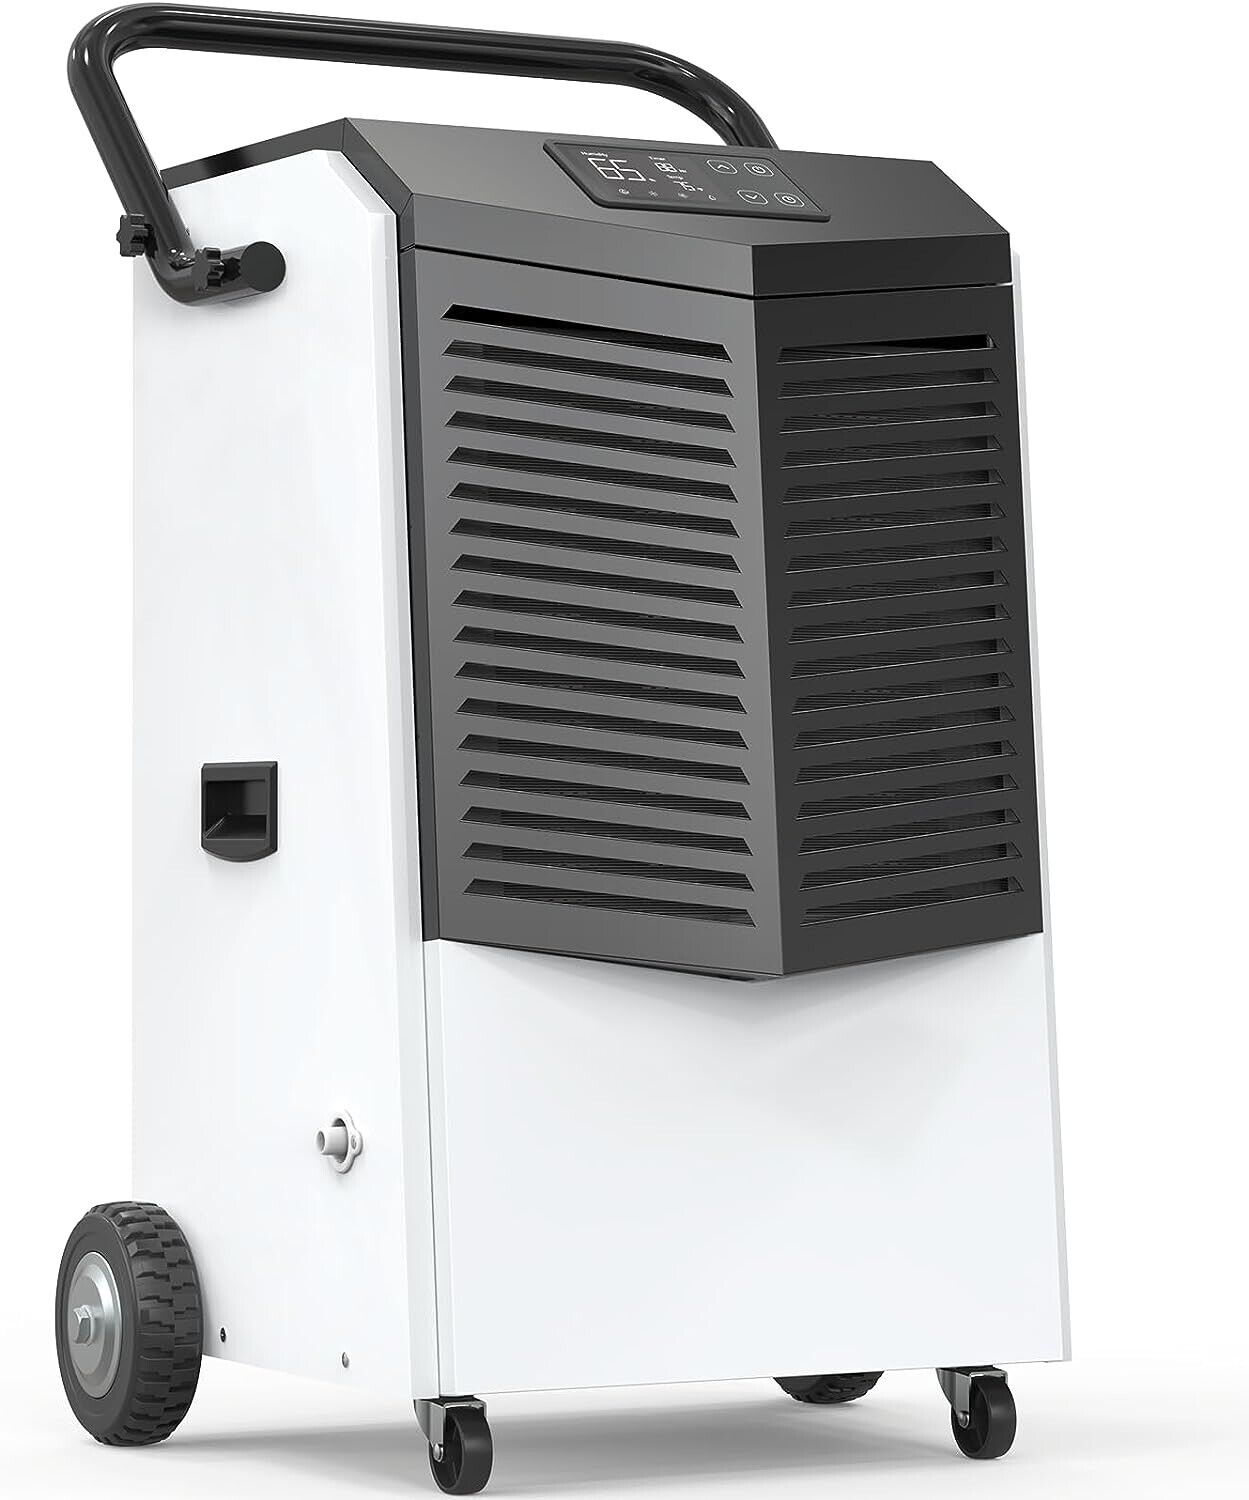 Moiswell 232 Pint Commercial Dehumidifier, Large Industrial Dehumidifier with Hose for Large Spaces Basements, Warehouse Flood, Water Damage Restoration